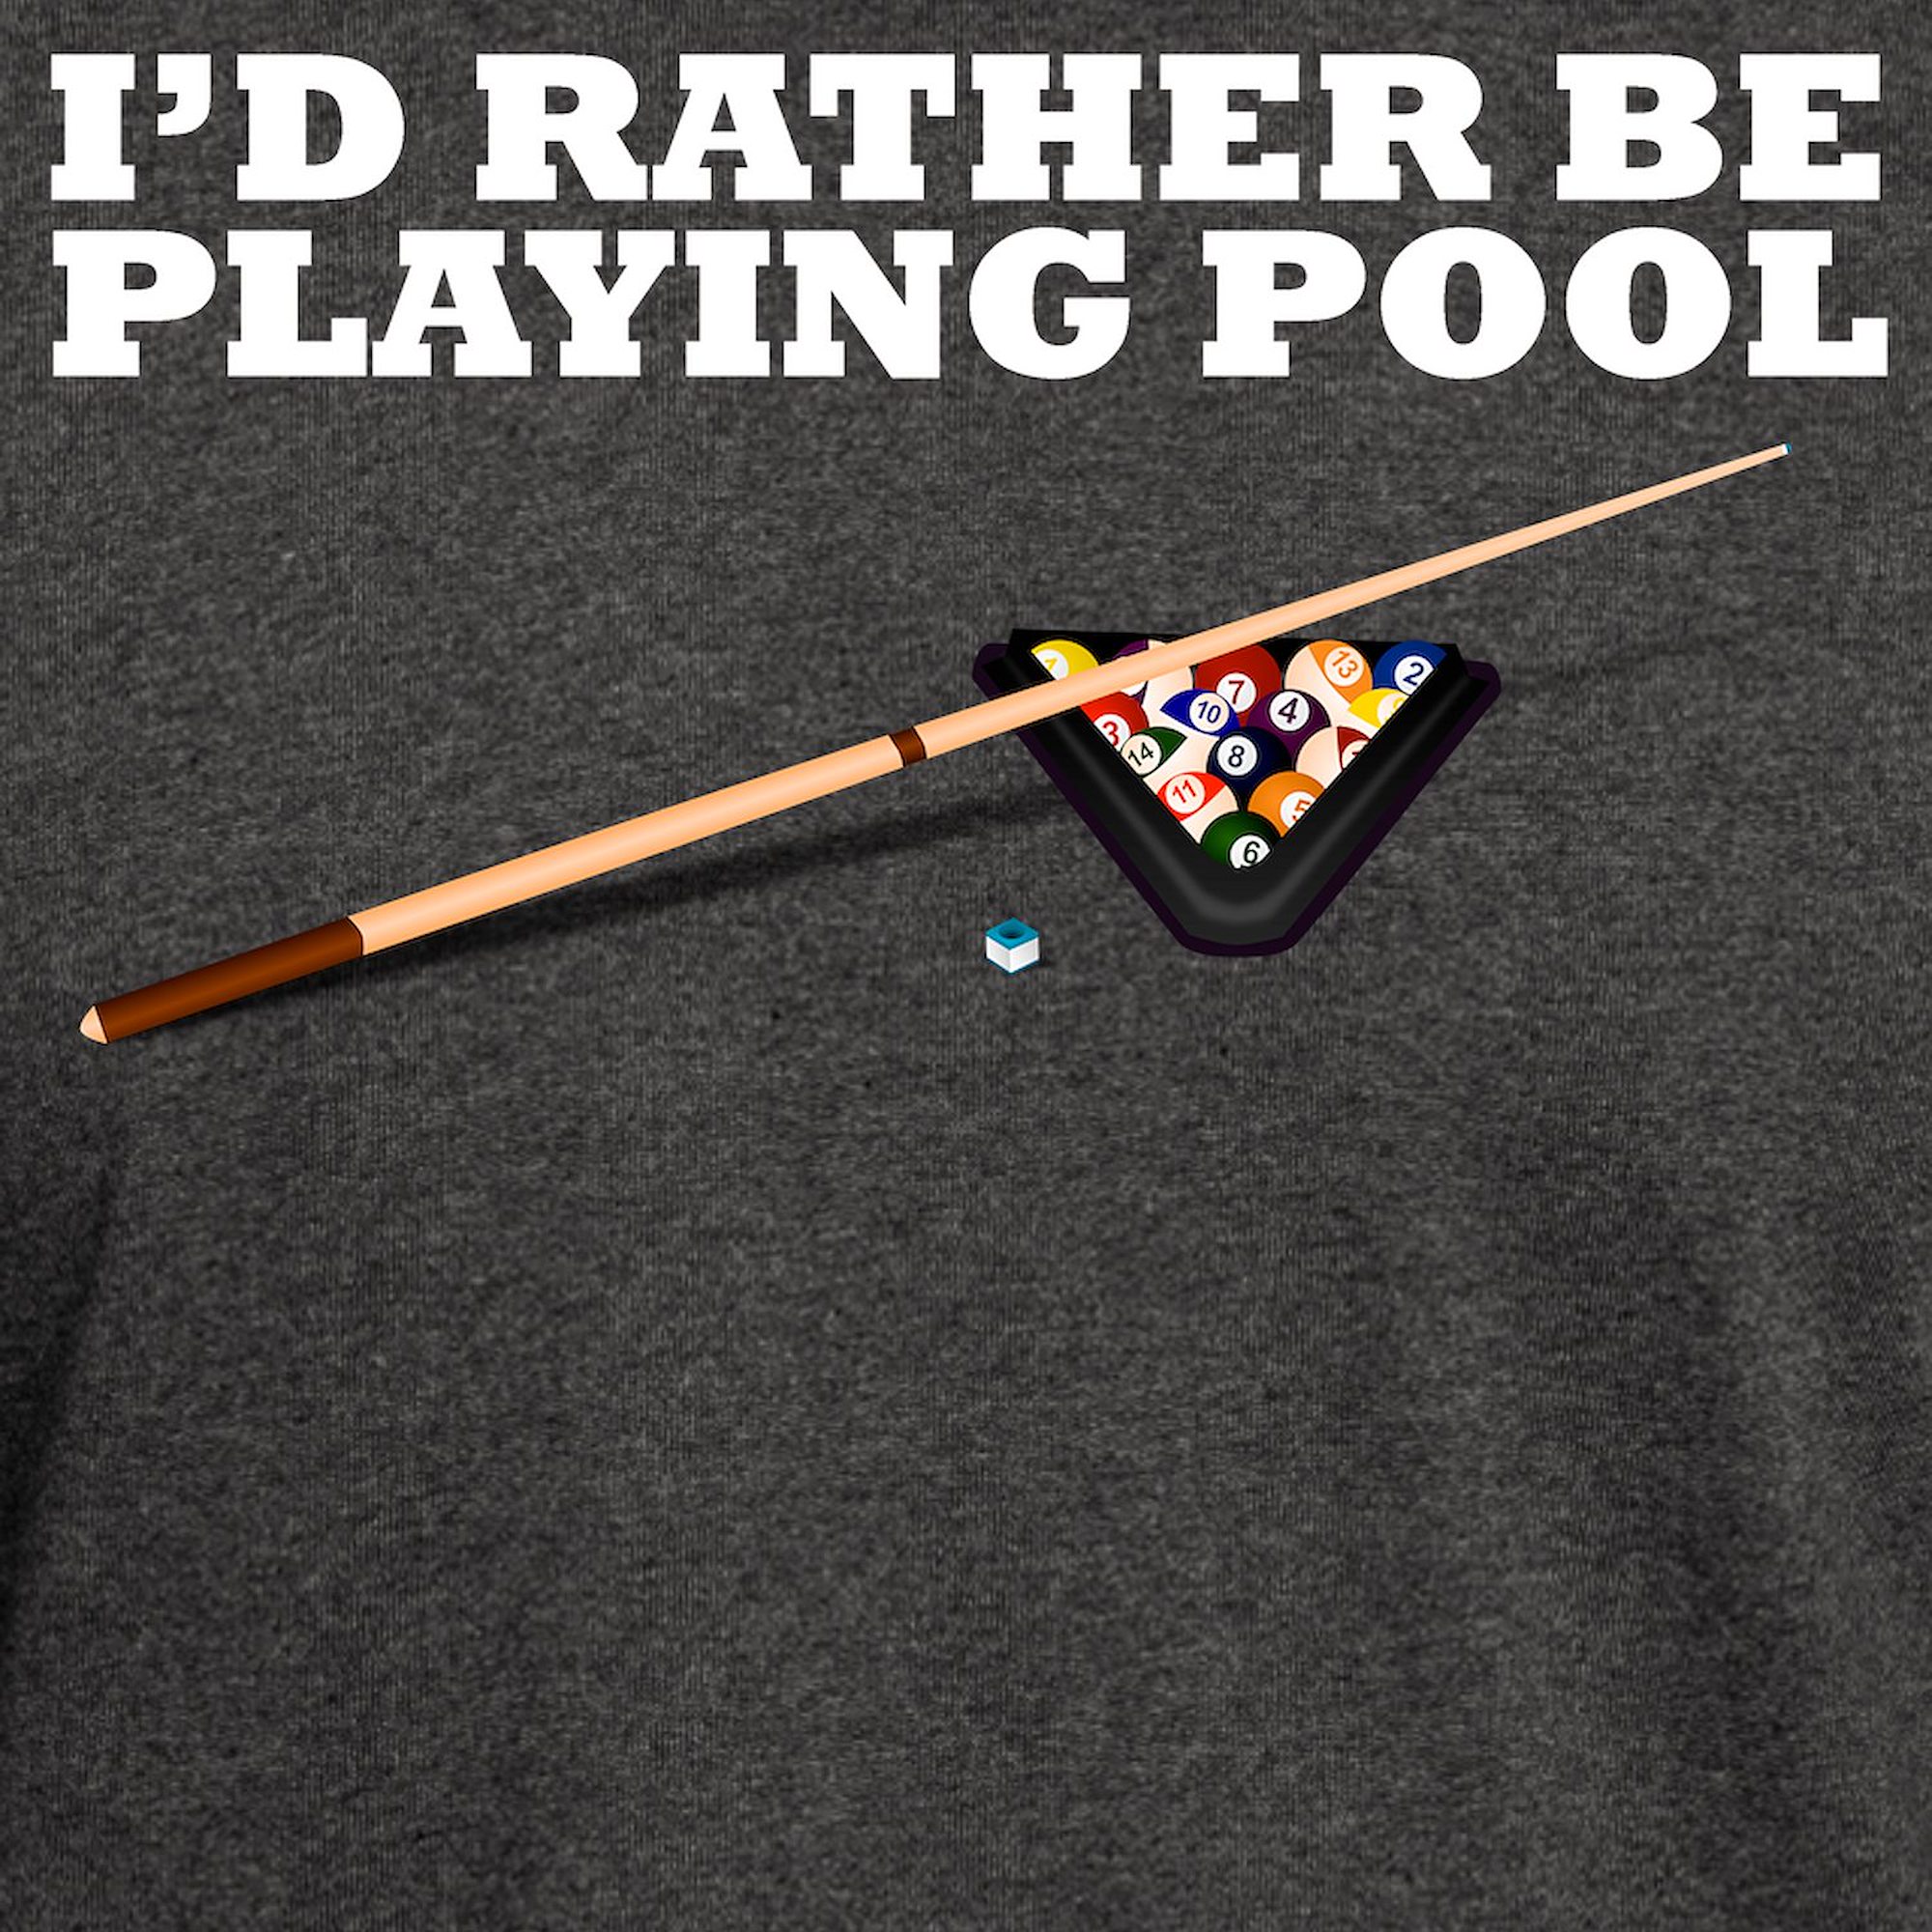 CafePress - Id Rather Be Playing Pool T Shirt - 100% Cotton T-Shirt - image 3 of 4